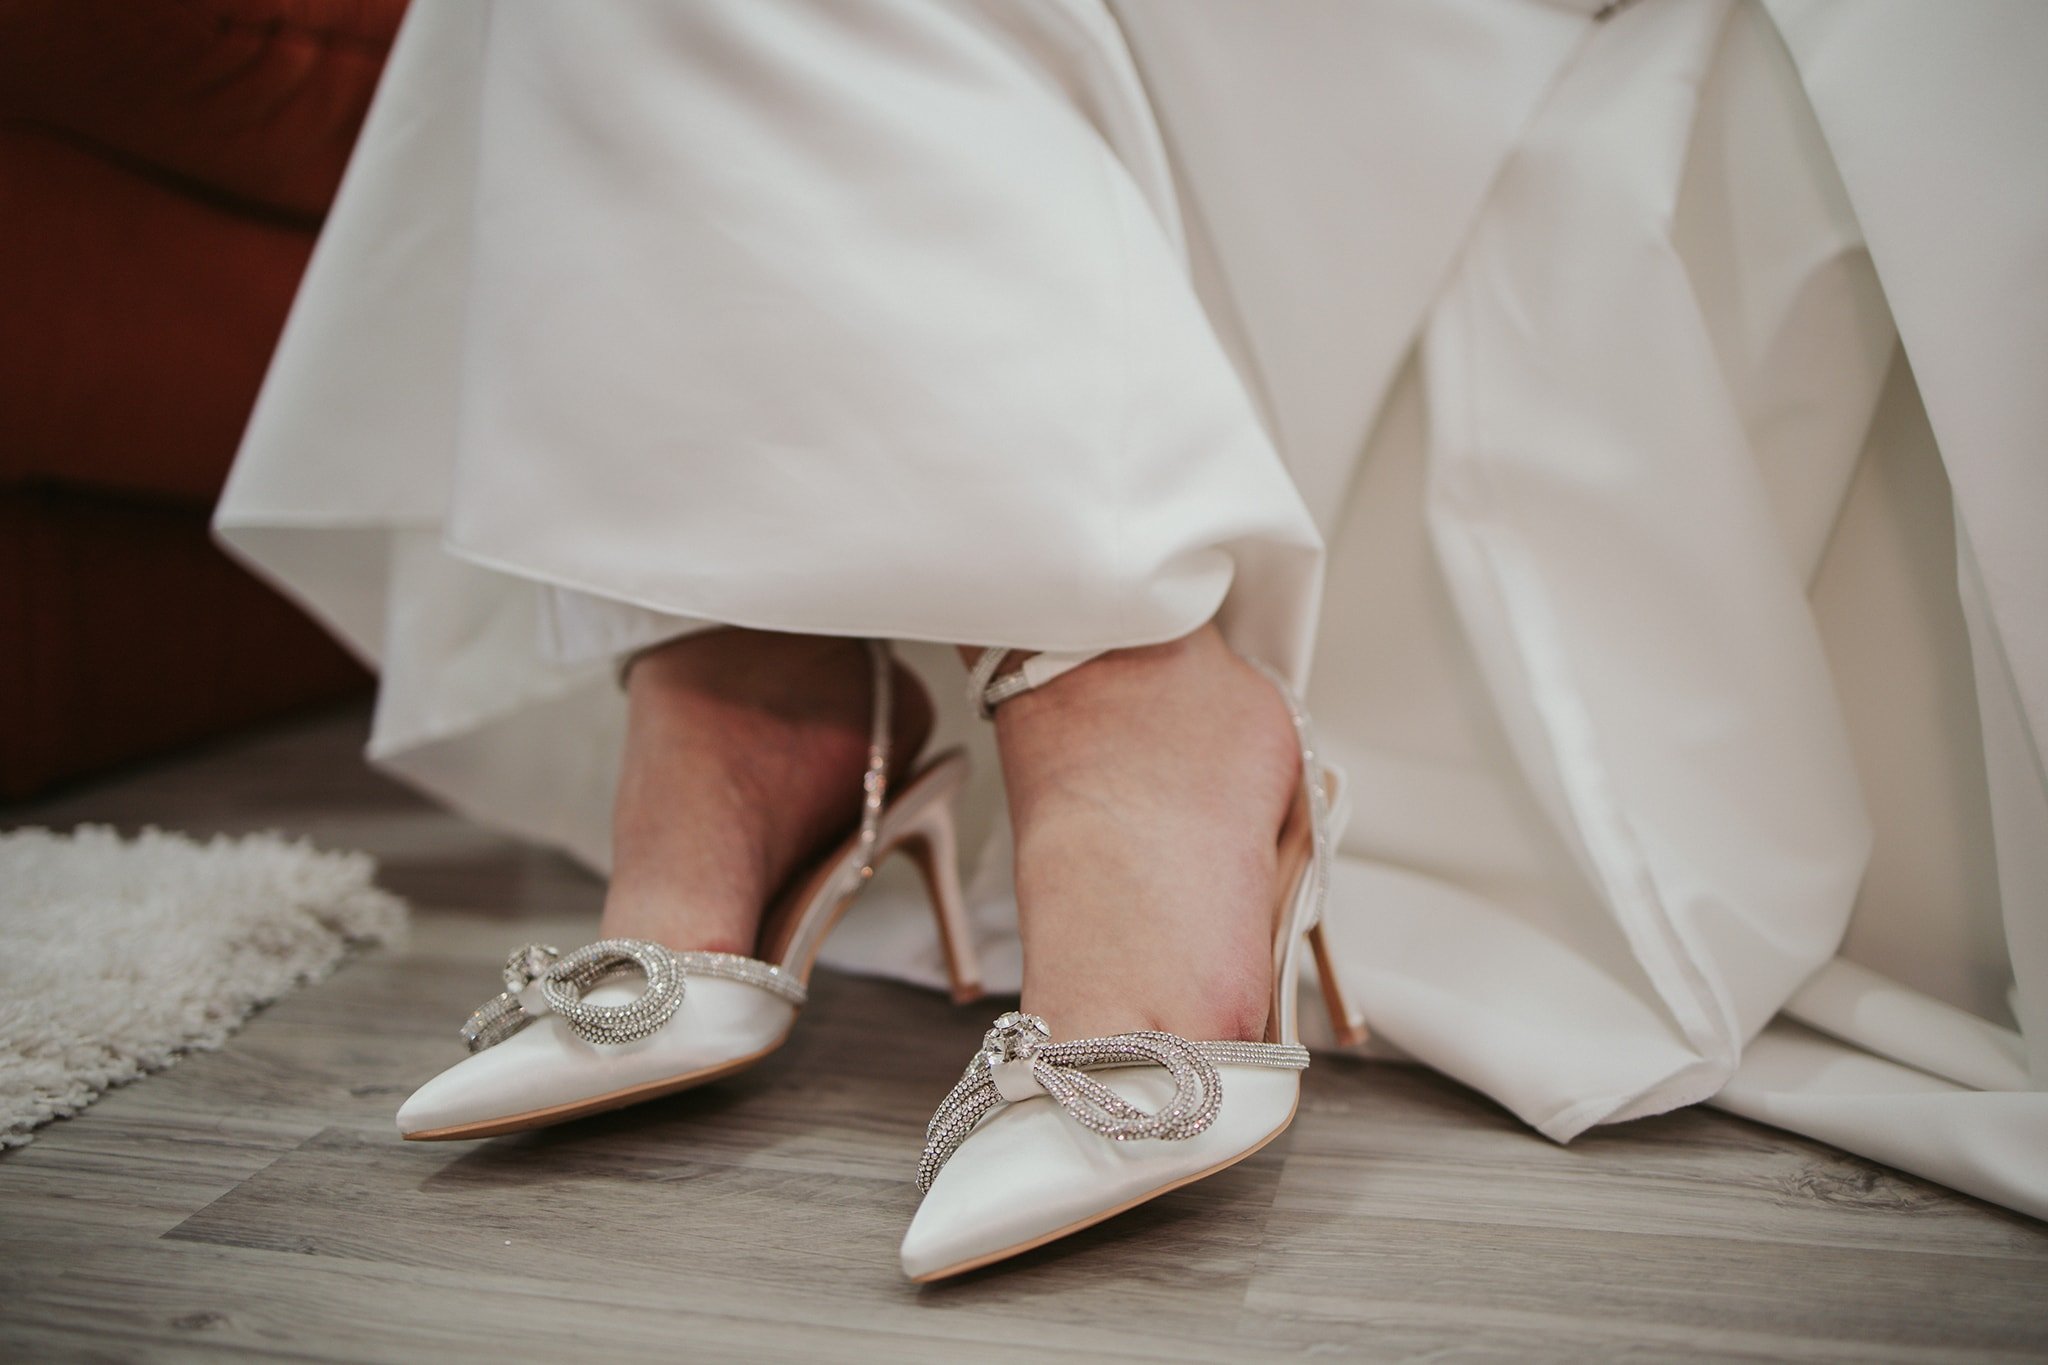 Brides often opt for heels that are sparkling with crystals, glitters, or sequins to create a standout look